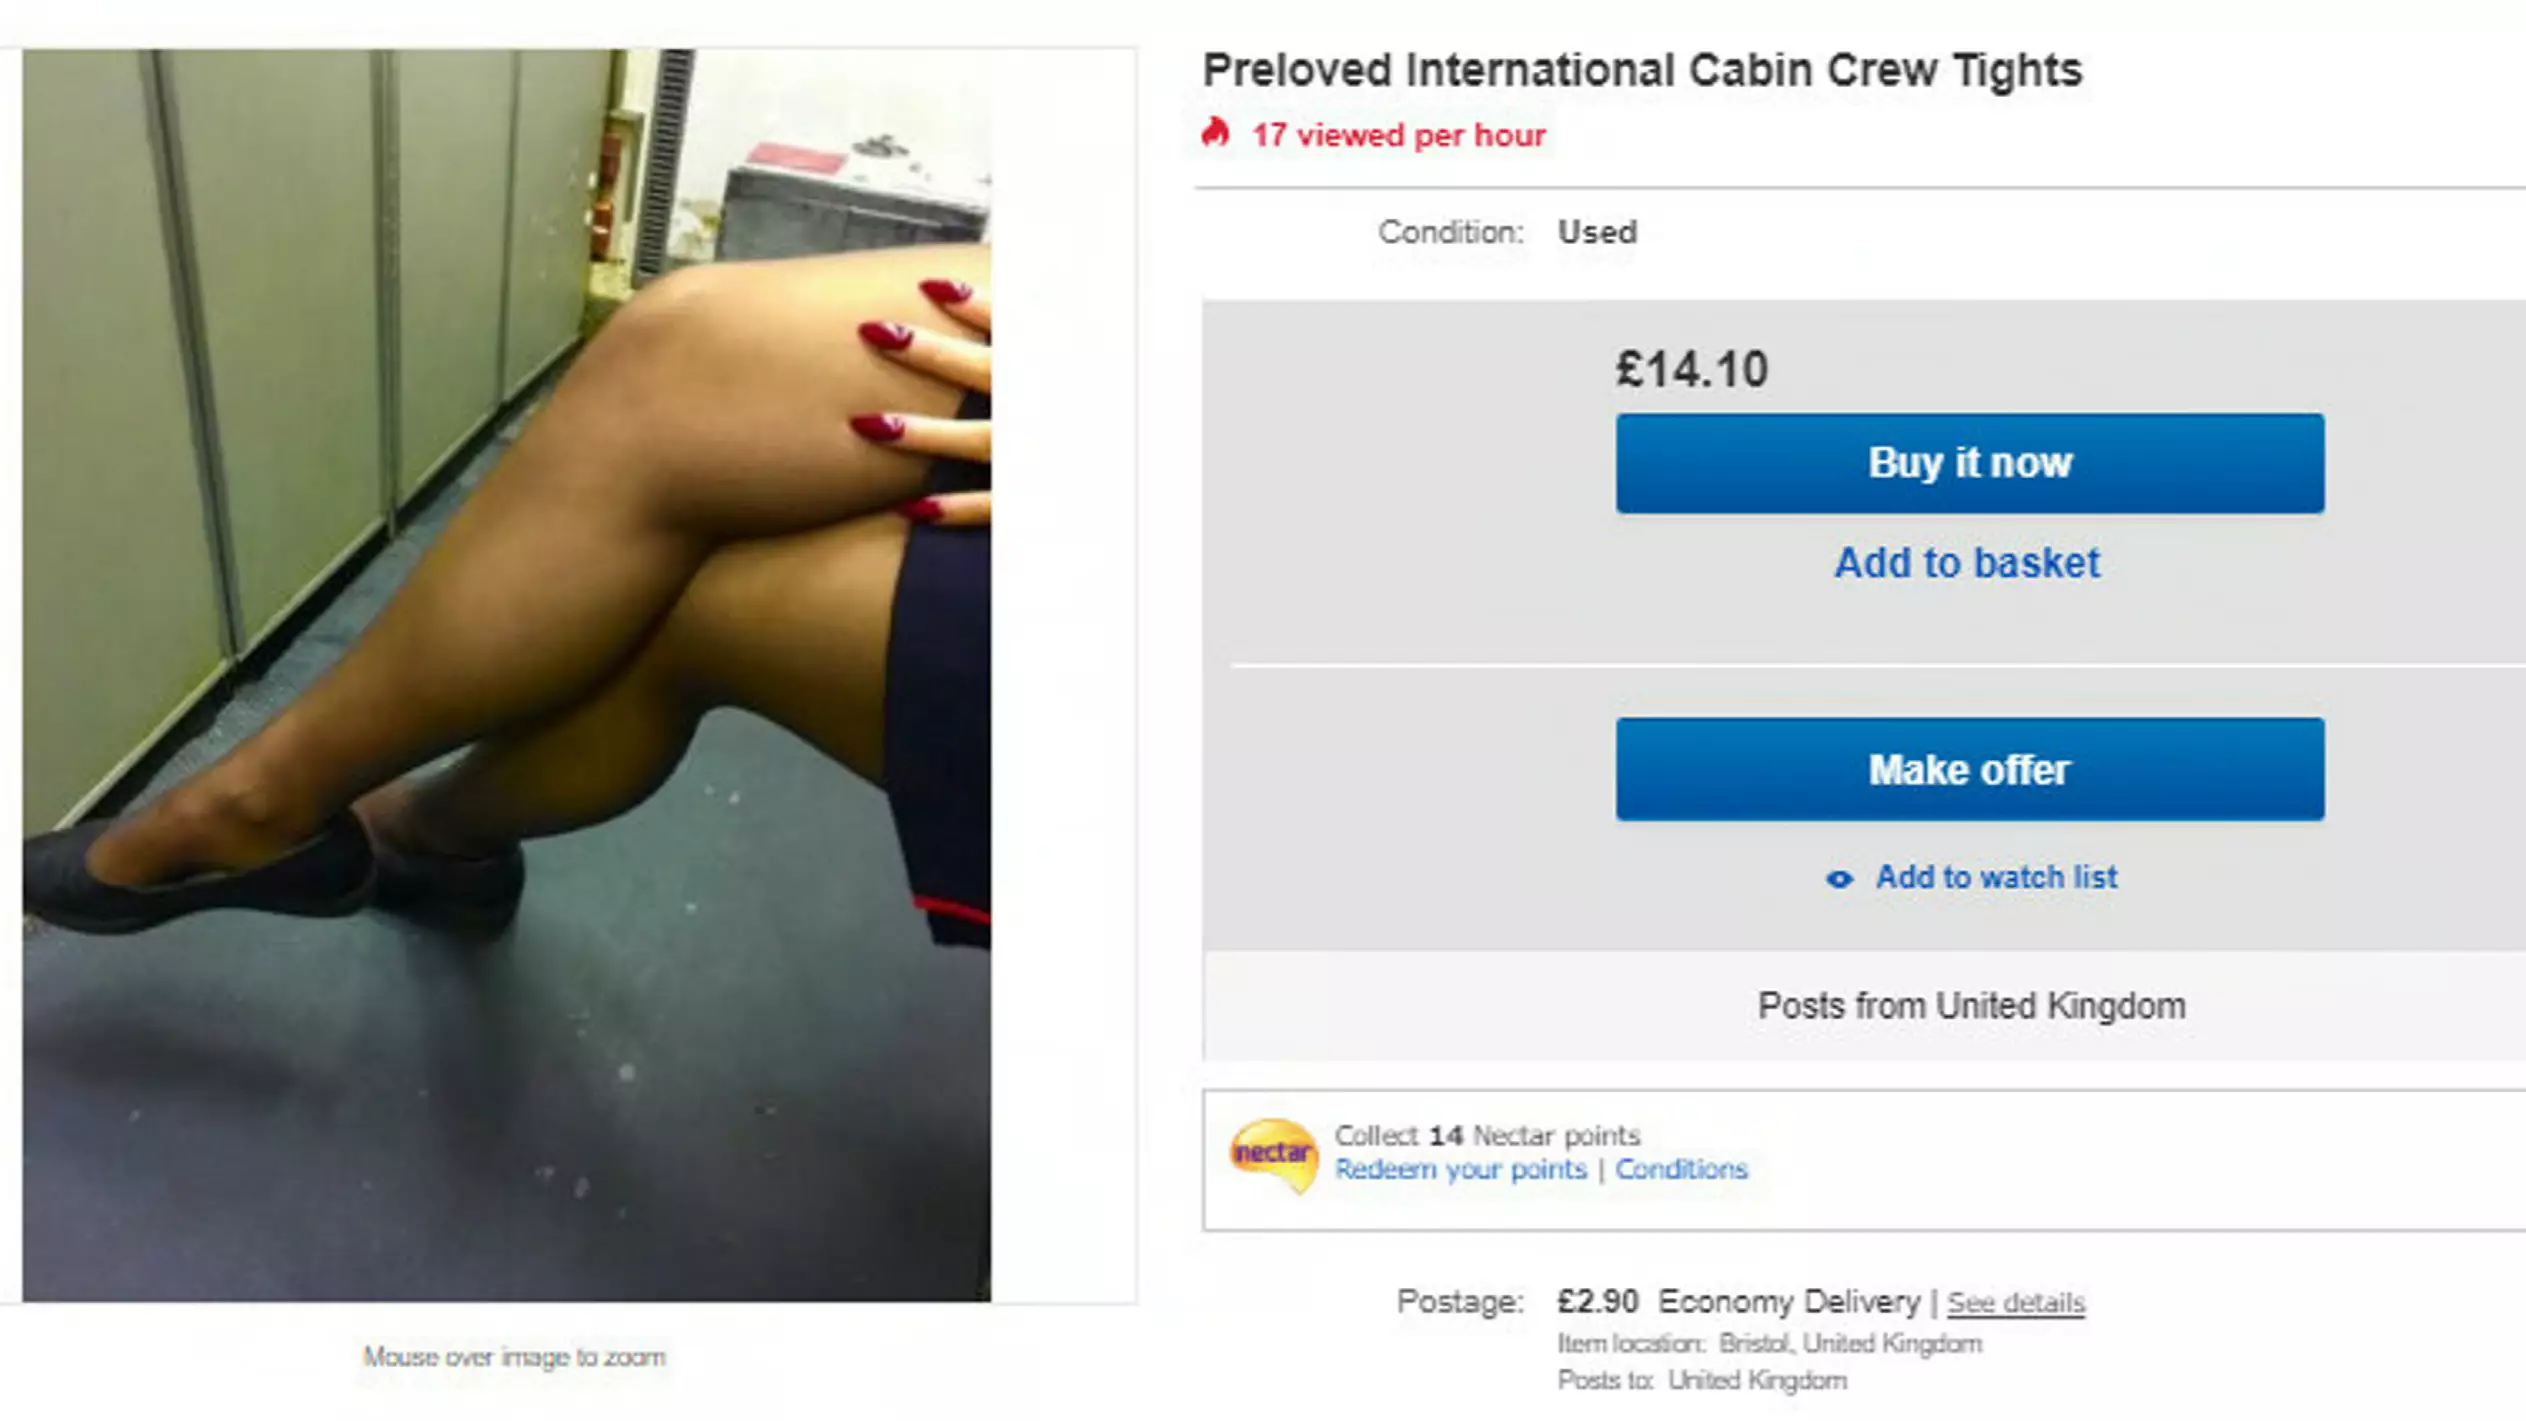 Air Steward Claims Cabin Crew Are Reduced To Selling Used And Unwashed Uniforms On eBay